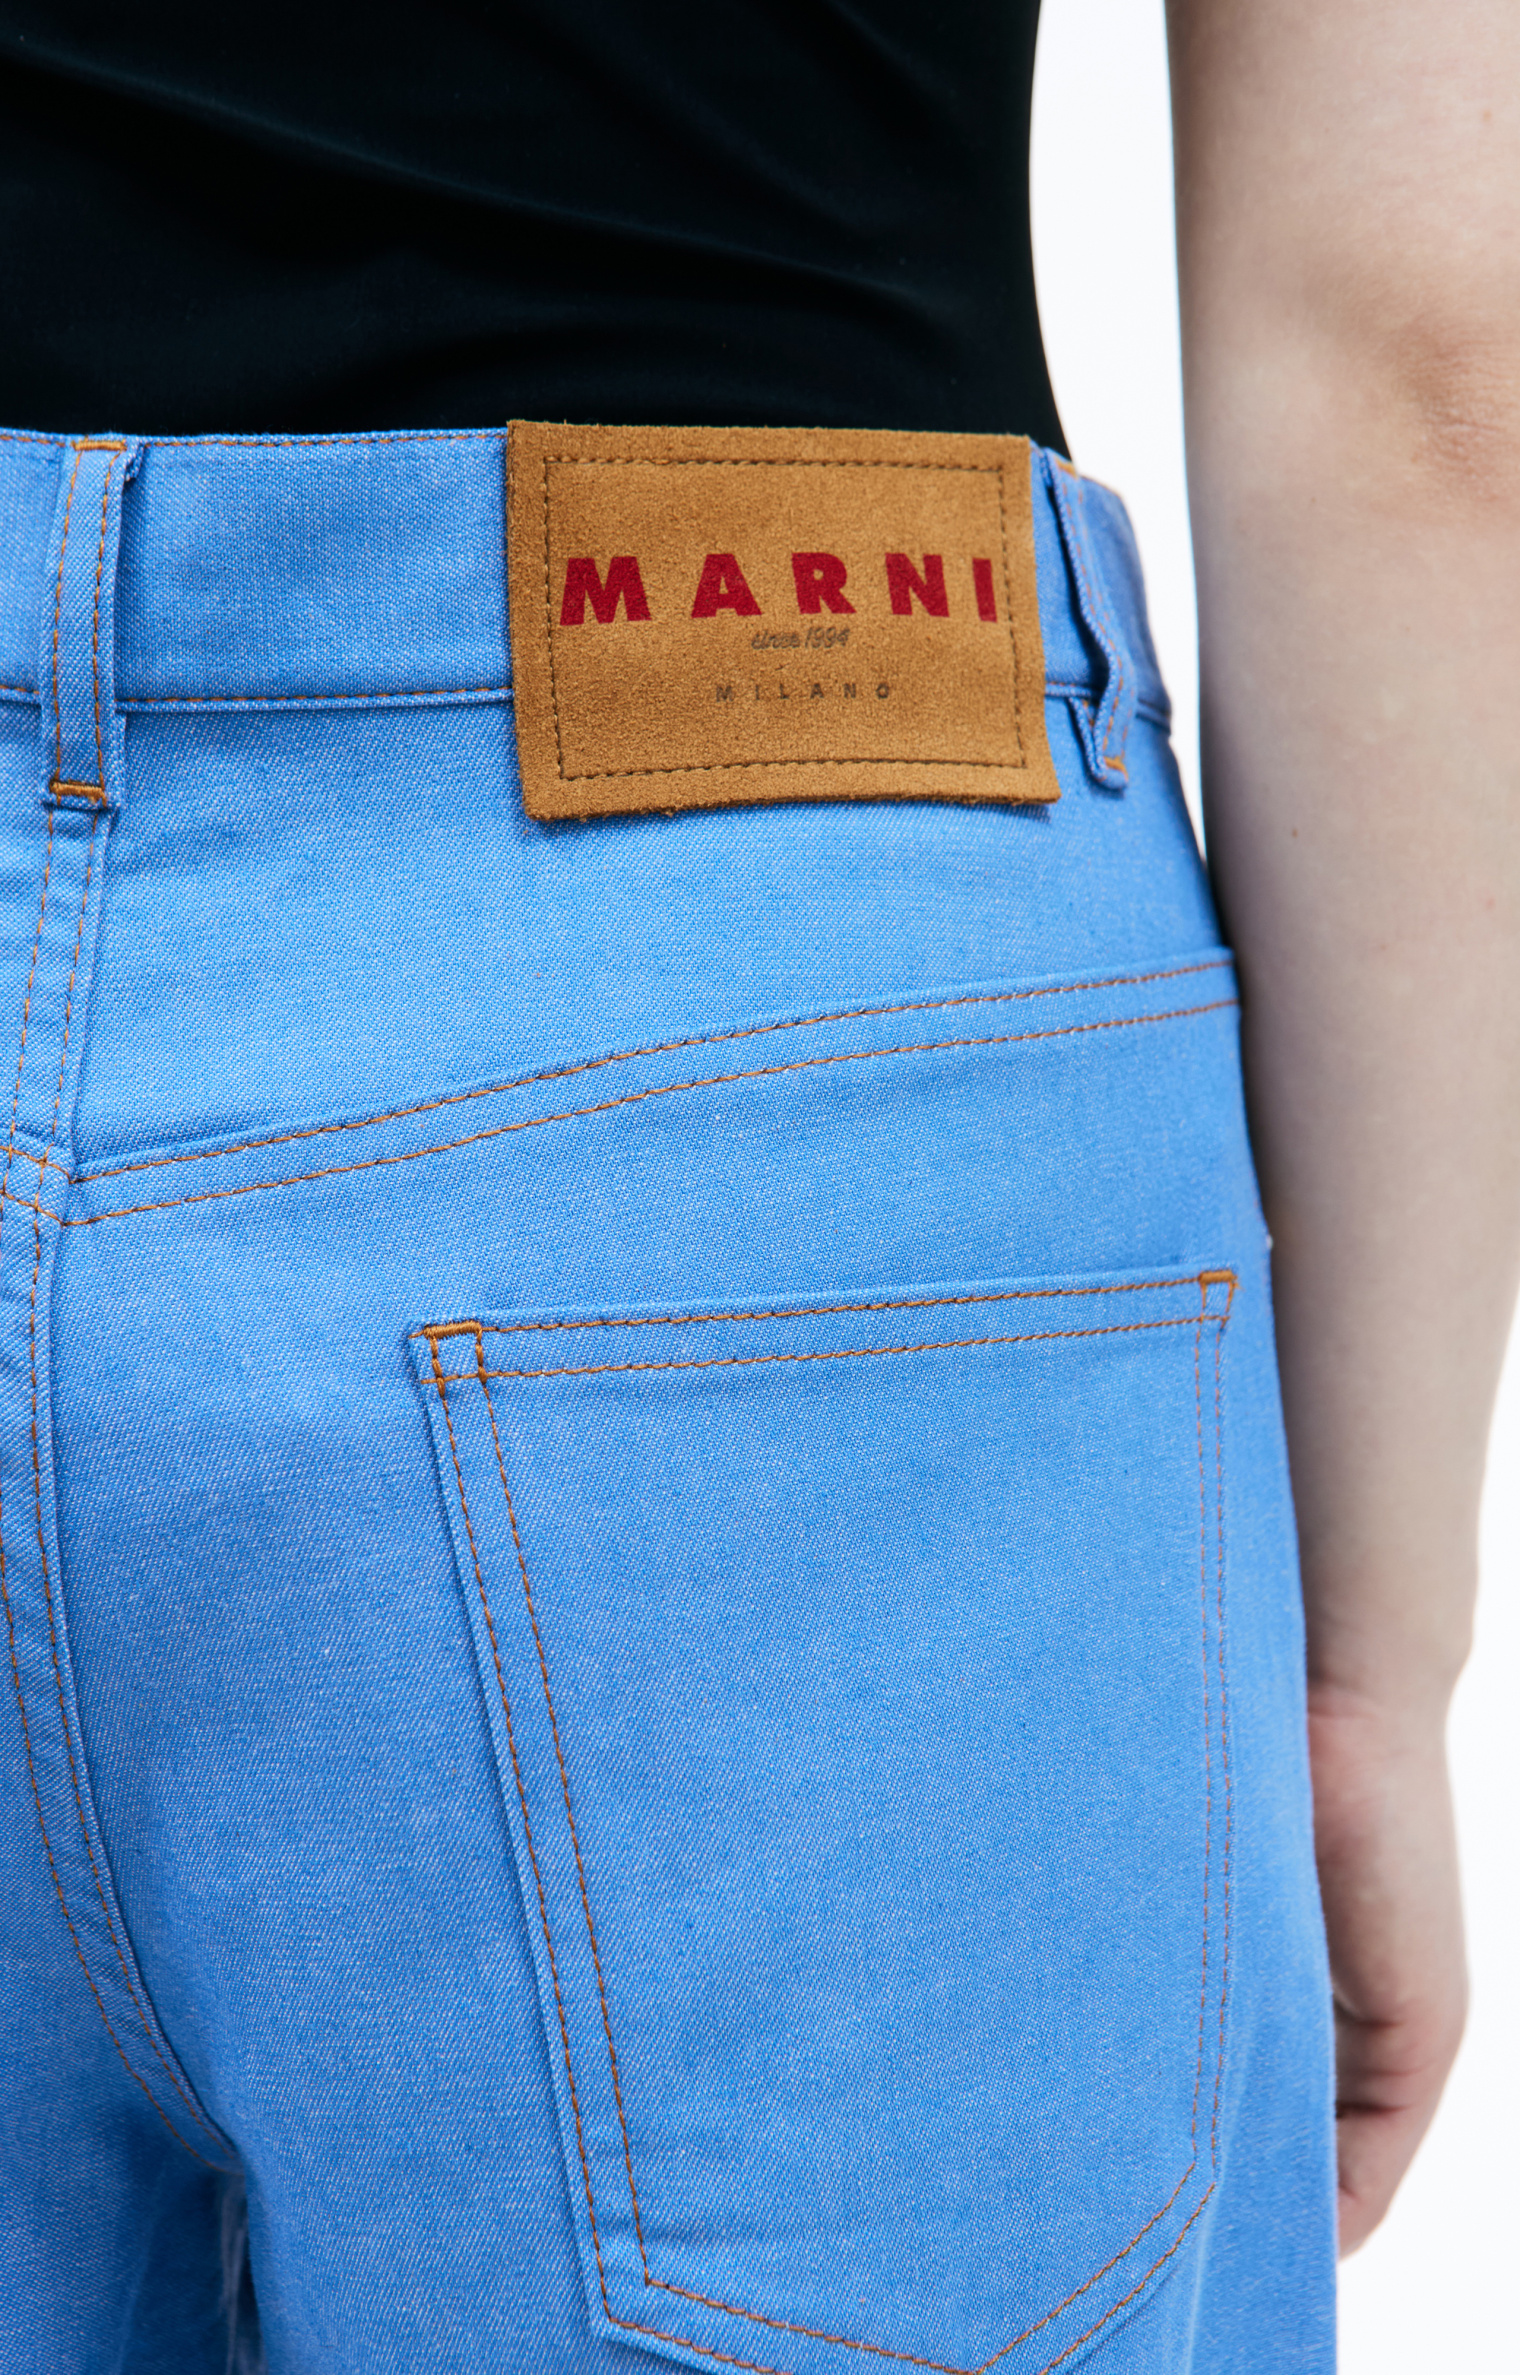 Marni Embroidered logo jeans